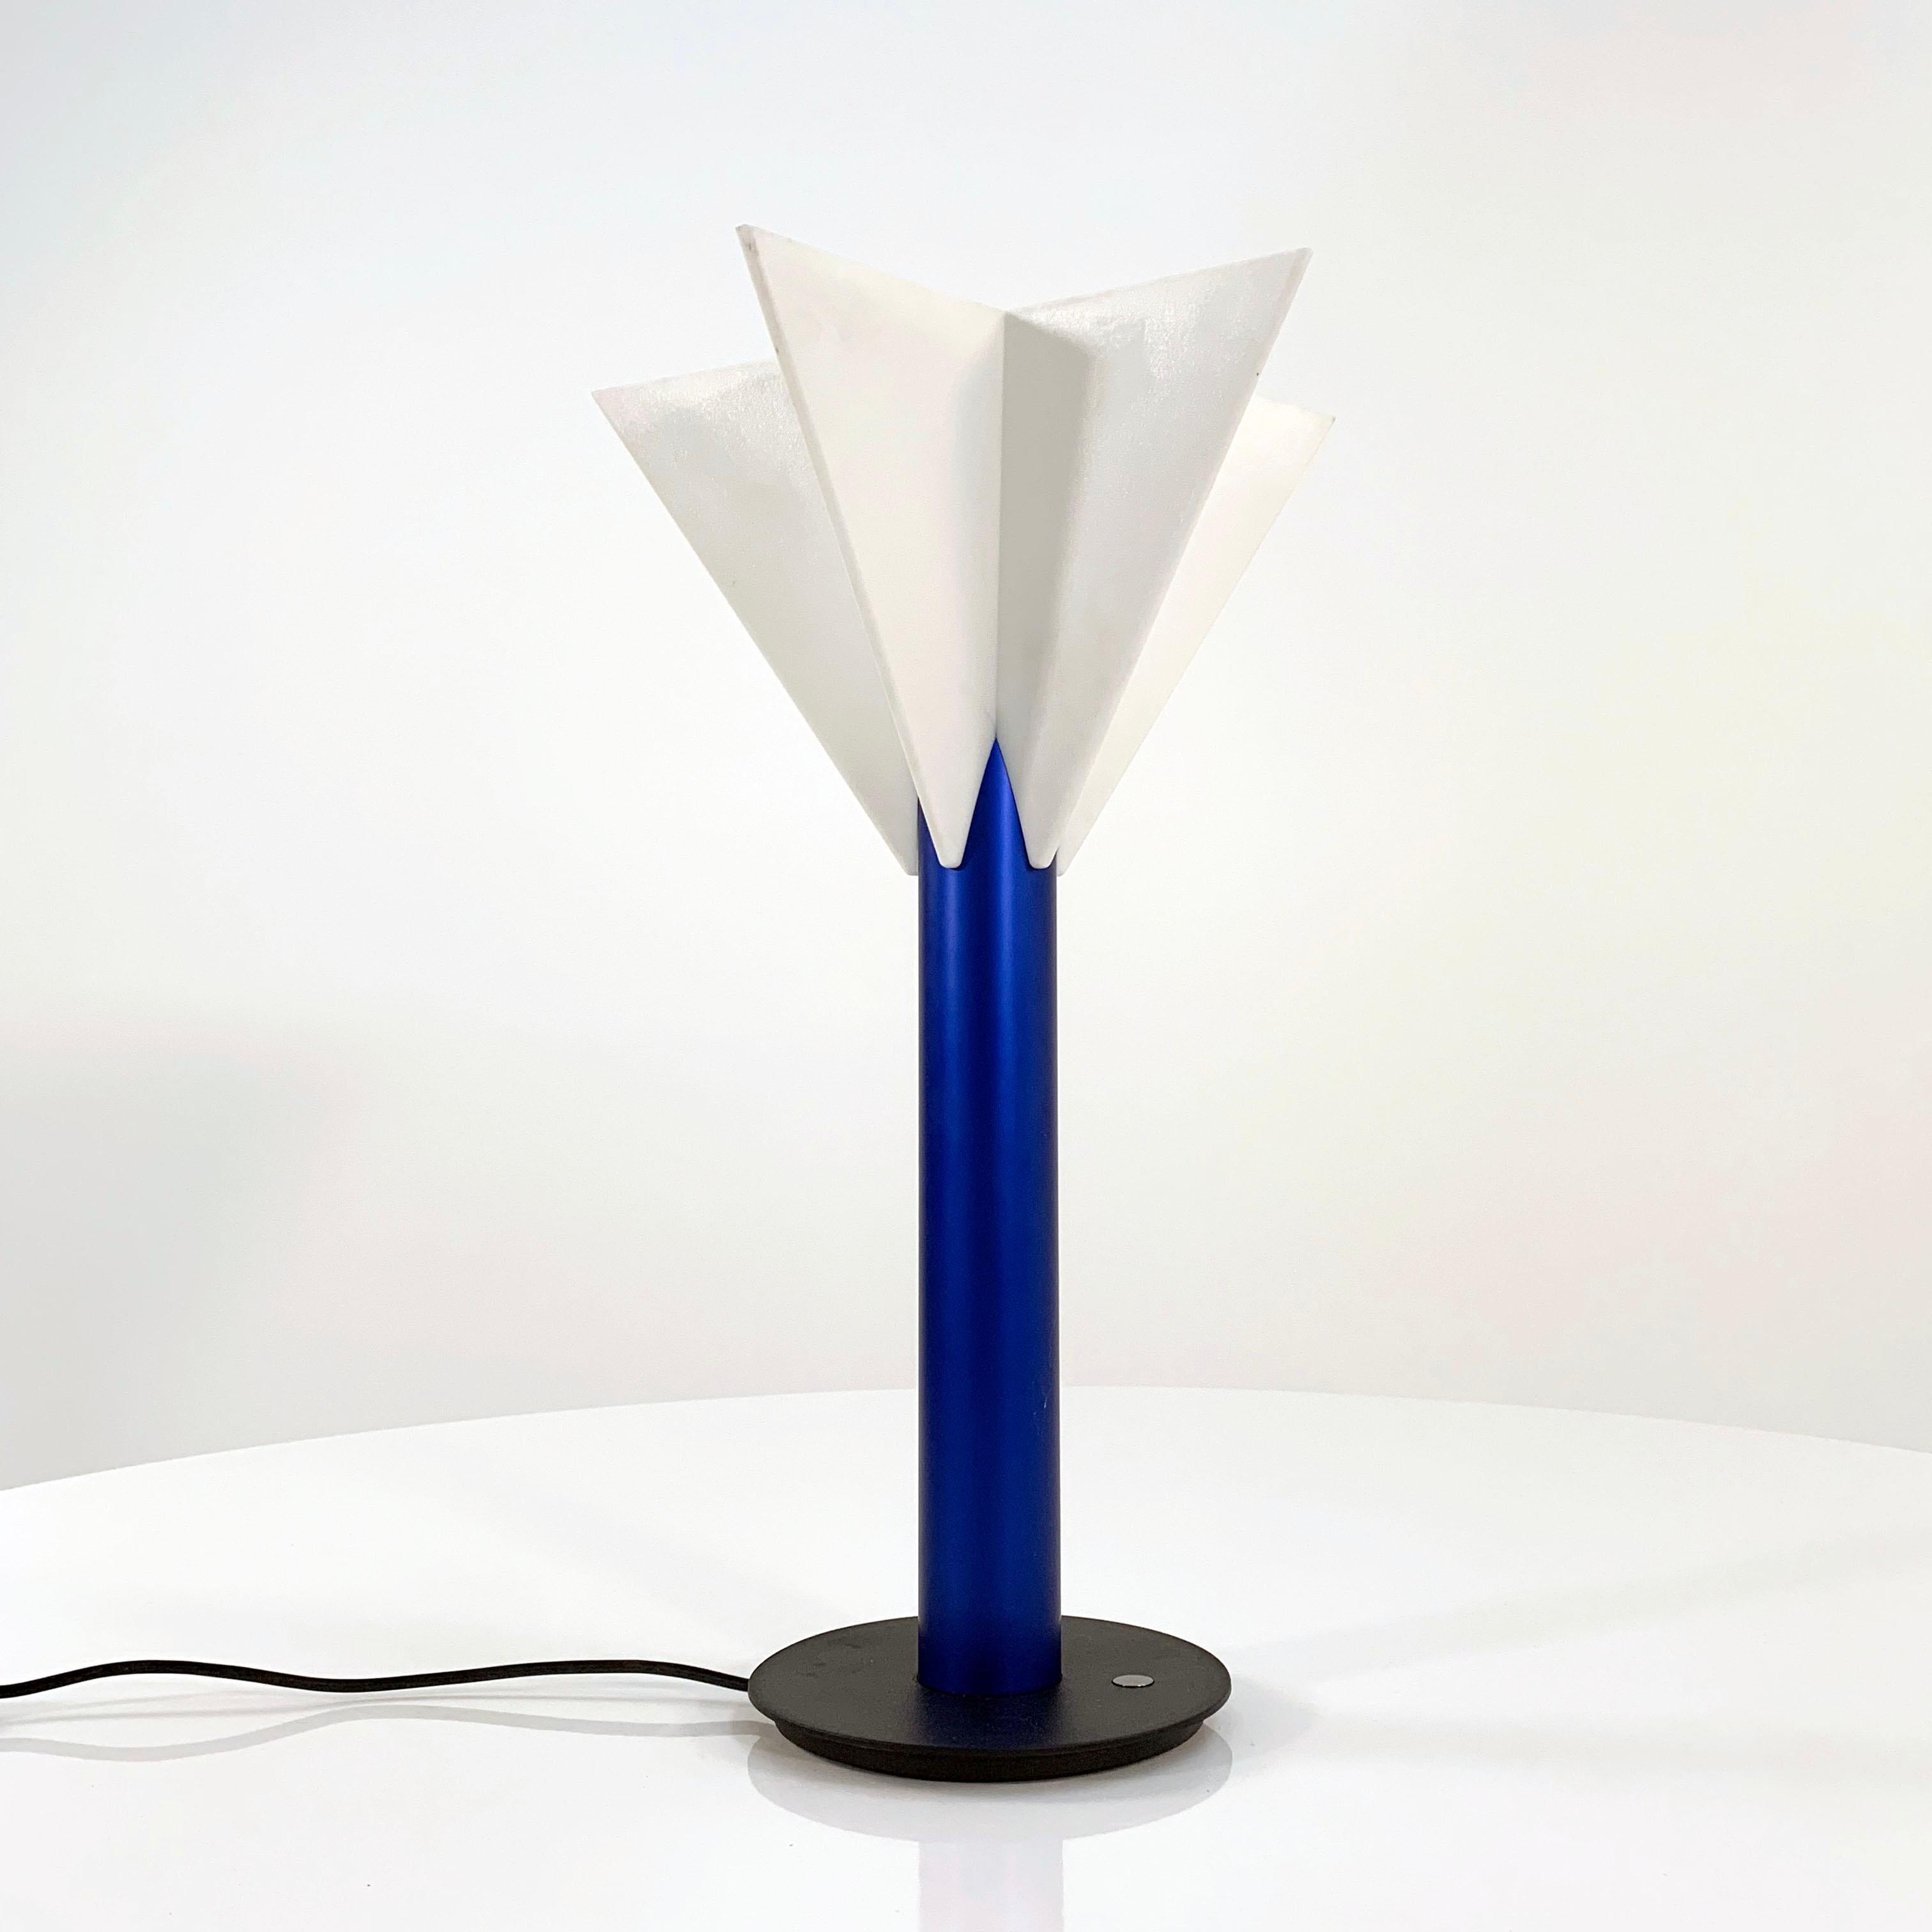 Astra table lamp by Salvatore Gregorietti for Status Milano, 1980s
Designer - Salvatore Gregorietti
Producer - Status Milano
Model - Astra Table Lamp
Design Period - Eighties
Measurements - Width 34 cm x Depth 34 cm x Height 57 cm
Materials -